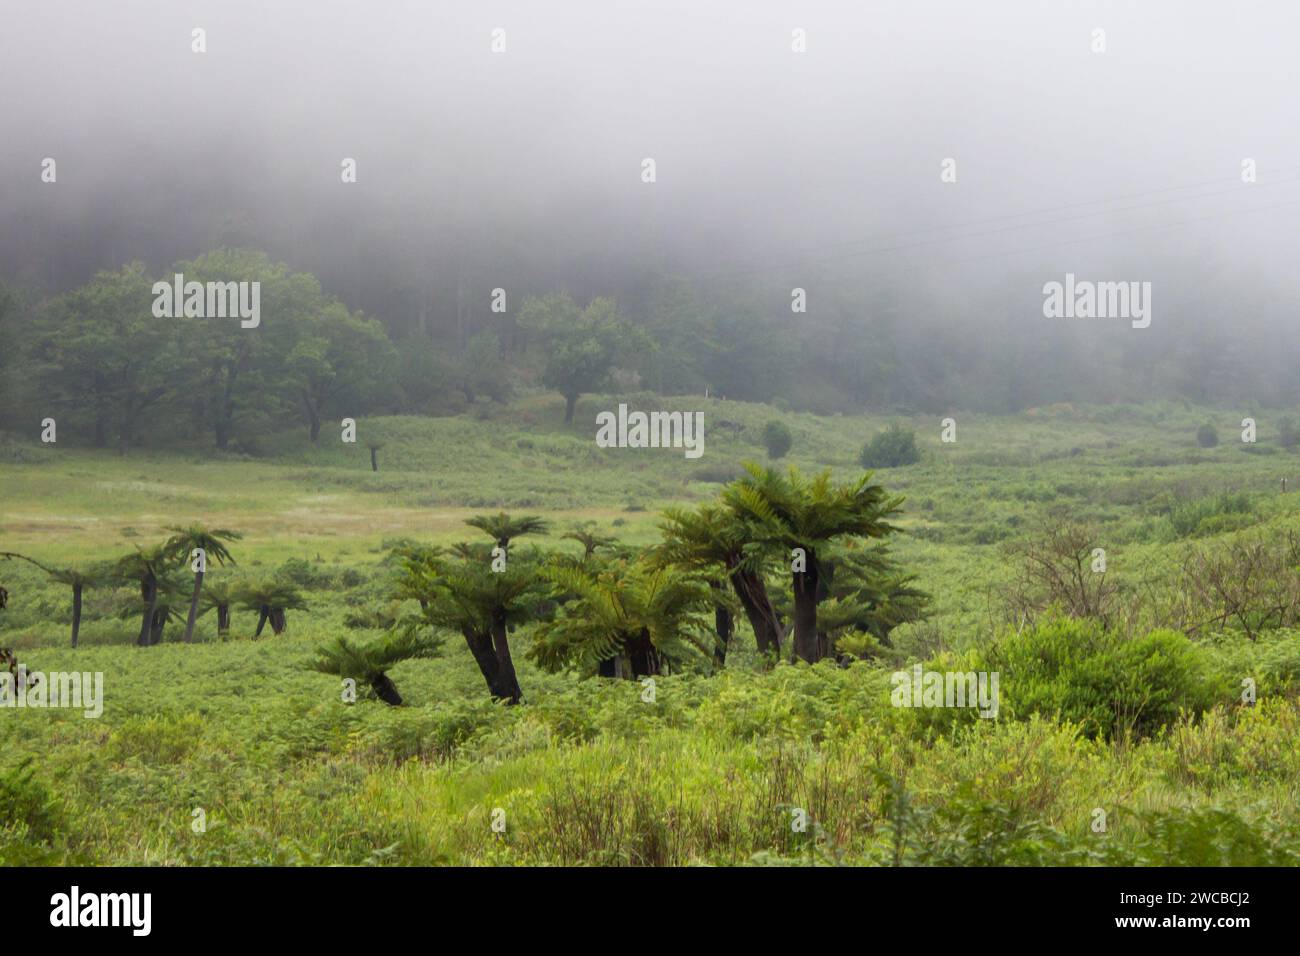 Misty morning in a grassy meadow filled with Prehistoric looking tall tree ferns, Alsophila dregei, in Magoebaskloof, South Africa. Stock Photo